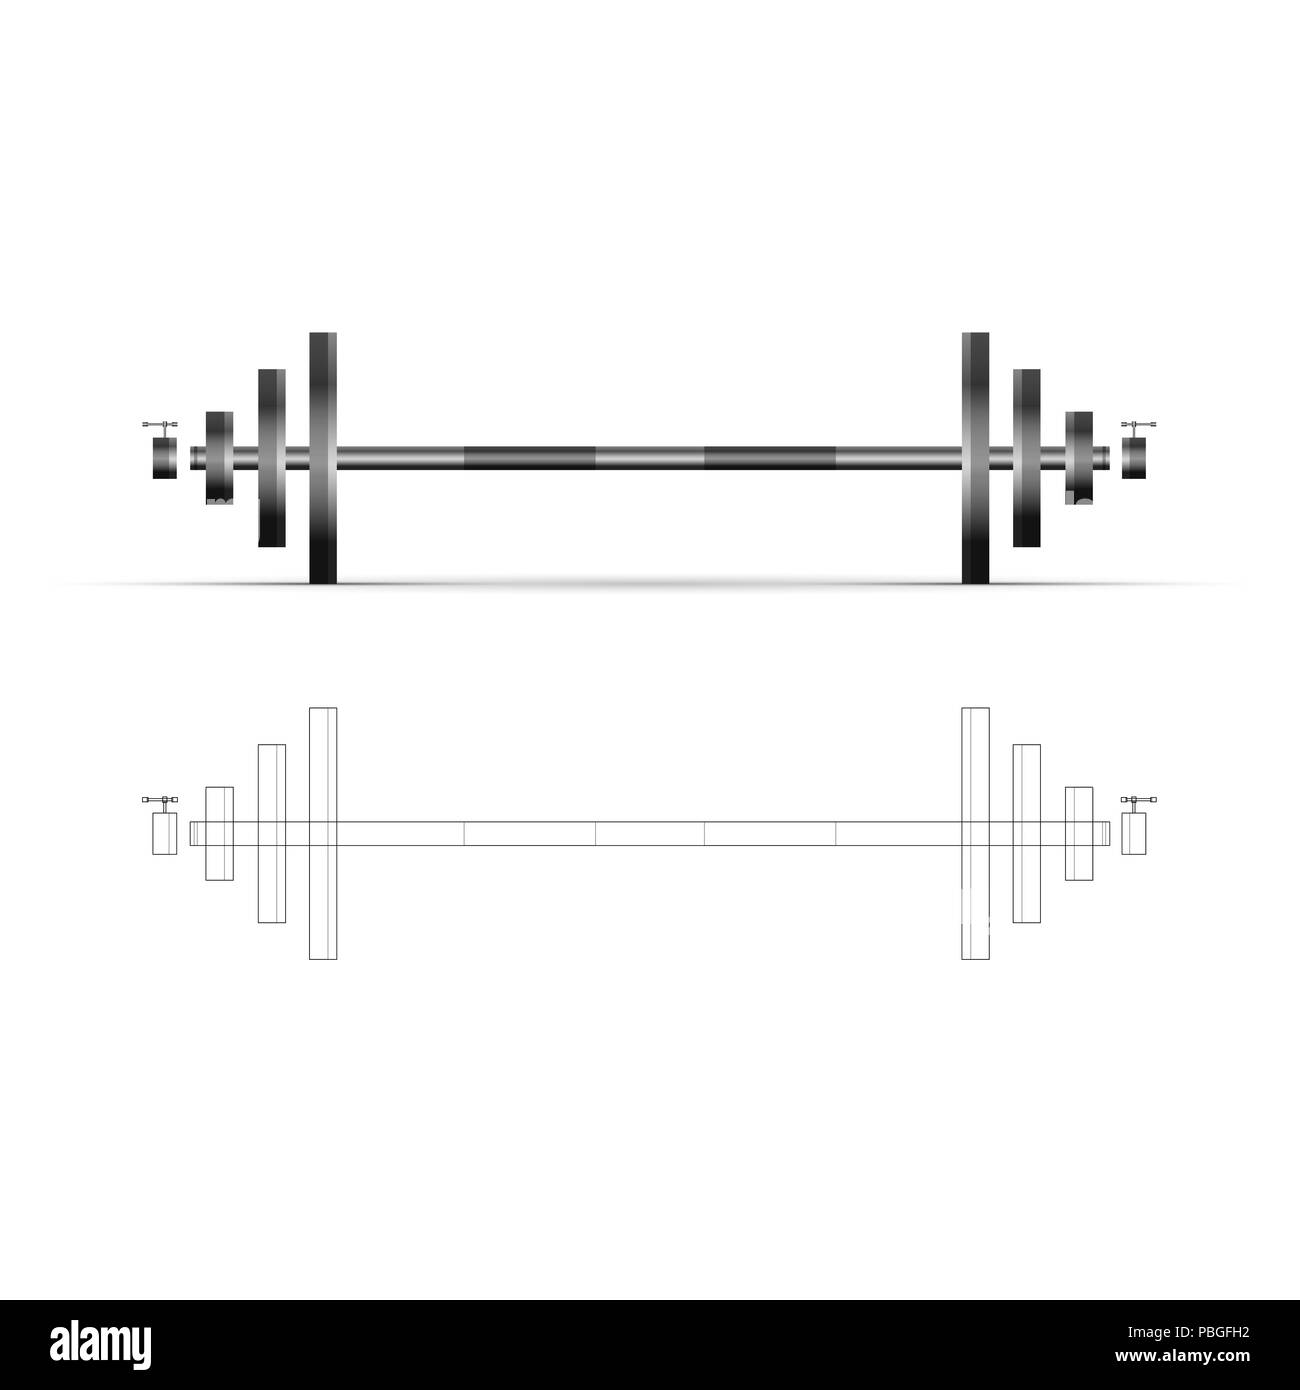 Sport Barbell. Fitness Gear. Design Elements Set for Web Design, Banners, Presentations or Business Cards, Flyers, Brochures and Posters. Stock Photo